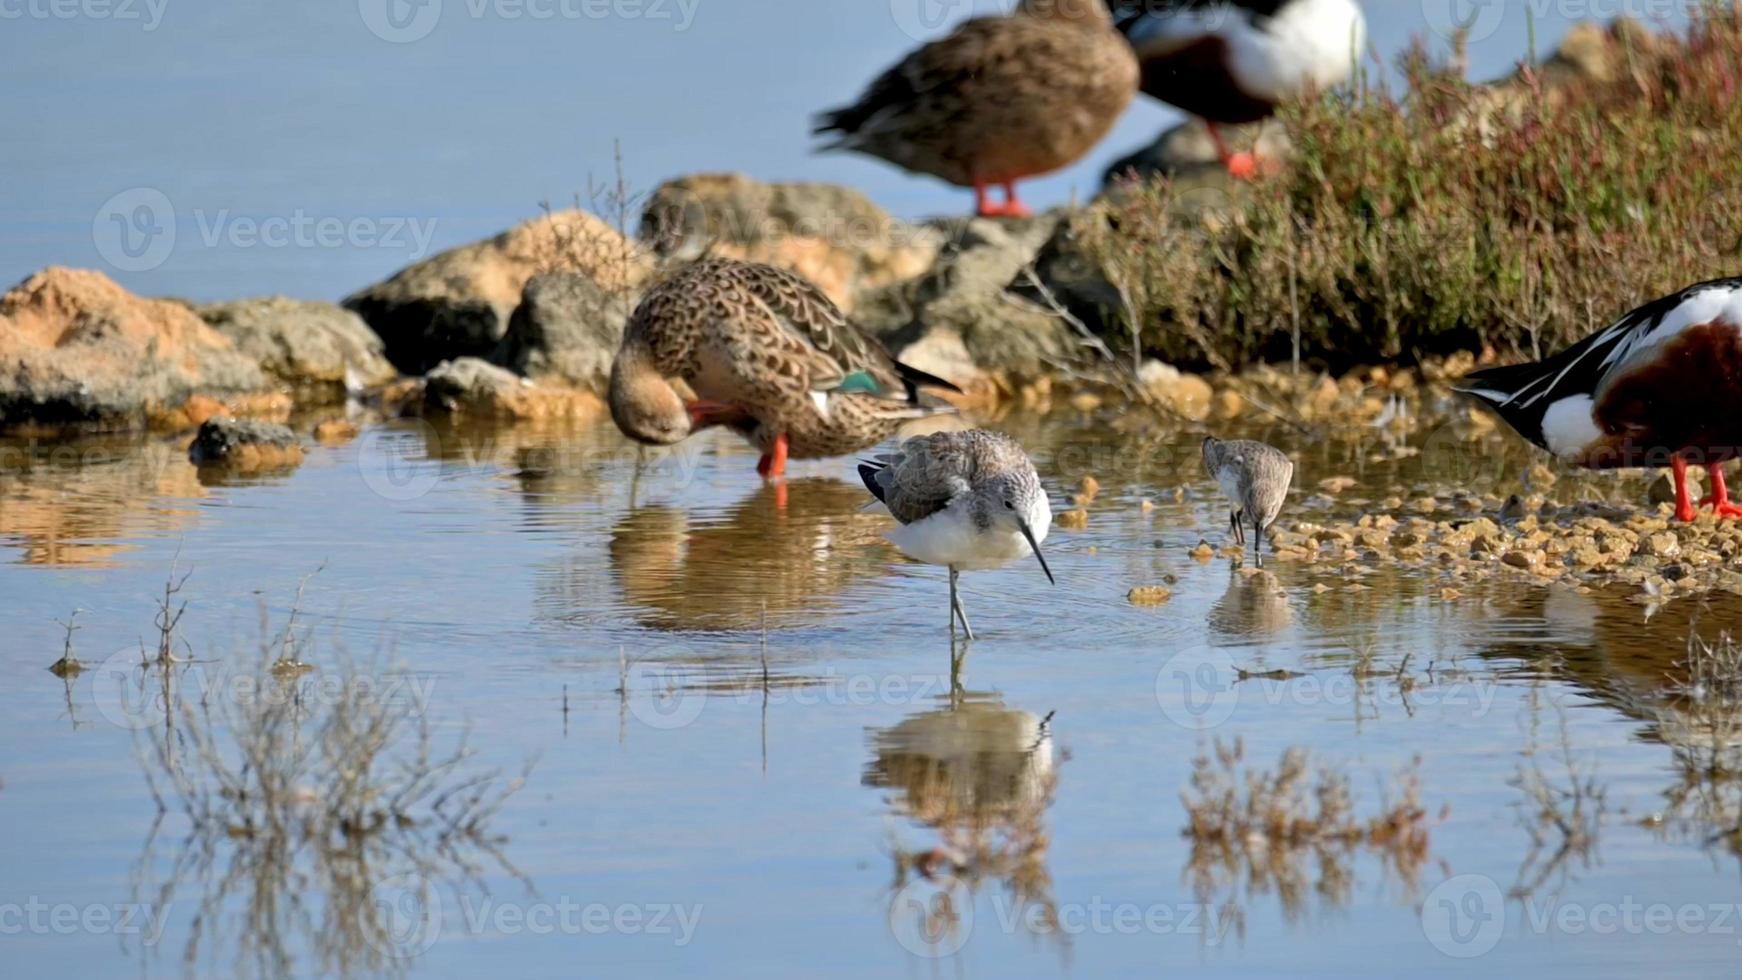 Tringa Nebularia wading through a shallow body of water, foraging for food photo